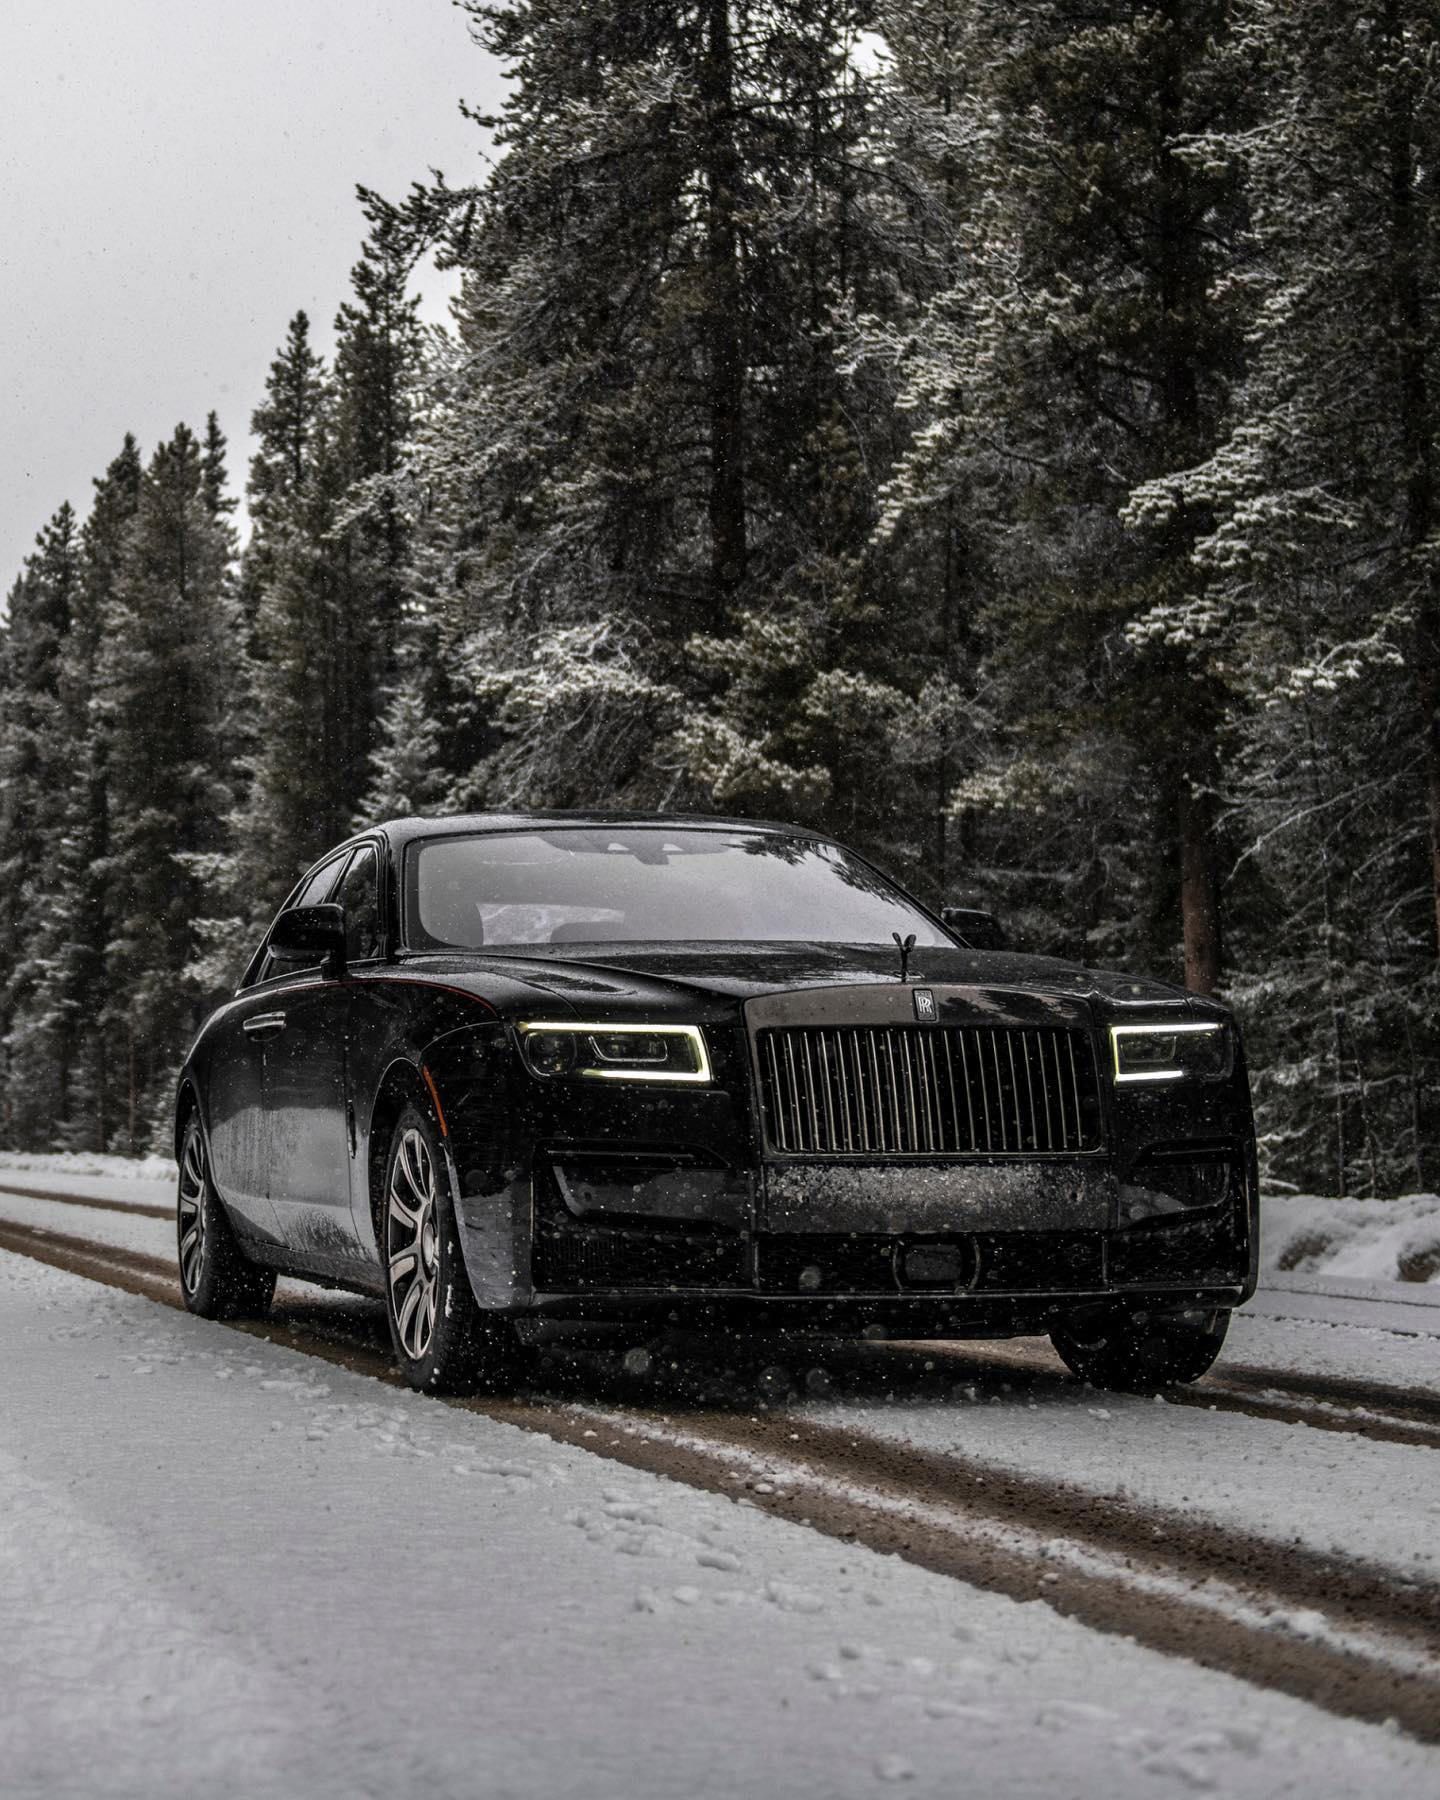 Rolls-Royce Motor Cars - Upon snow-covered grounds, Black Badge Ghost has an amplified, rebellious p